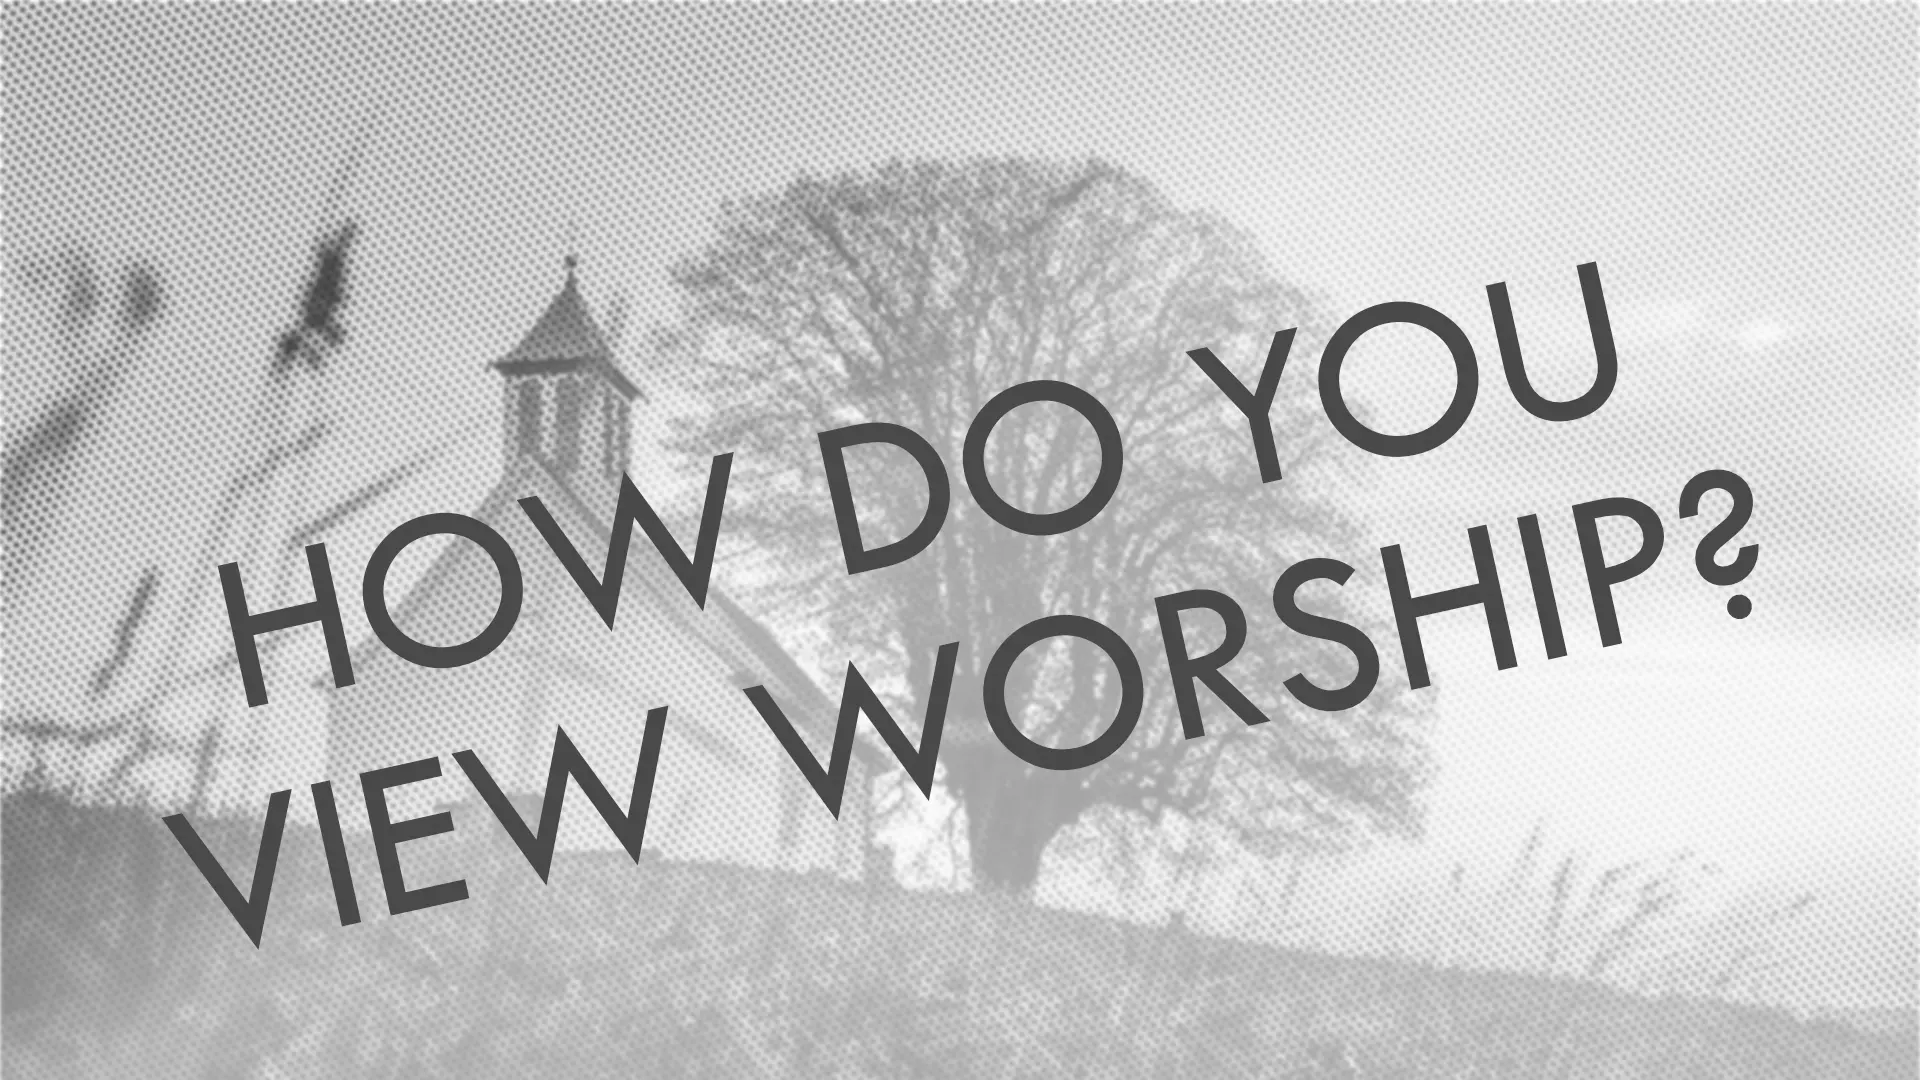 How do you view worship?